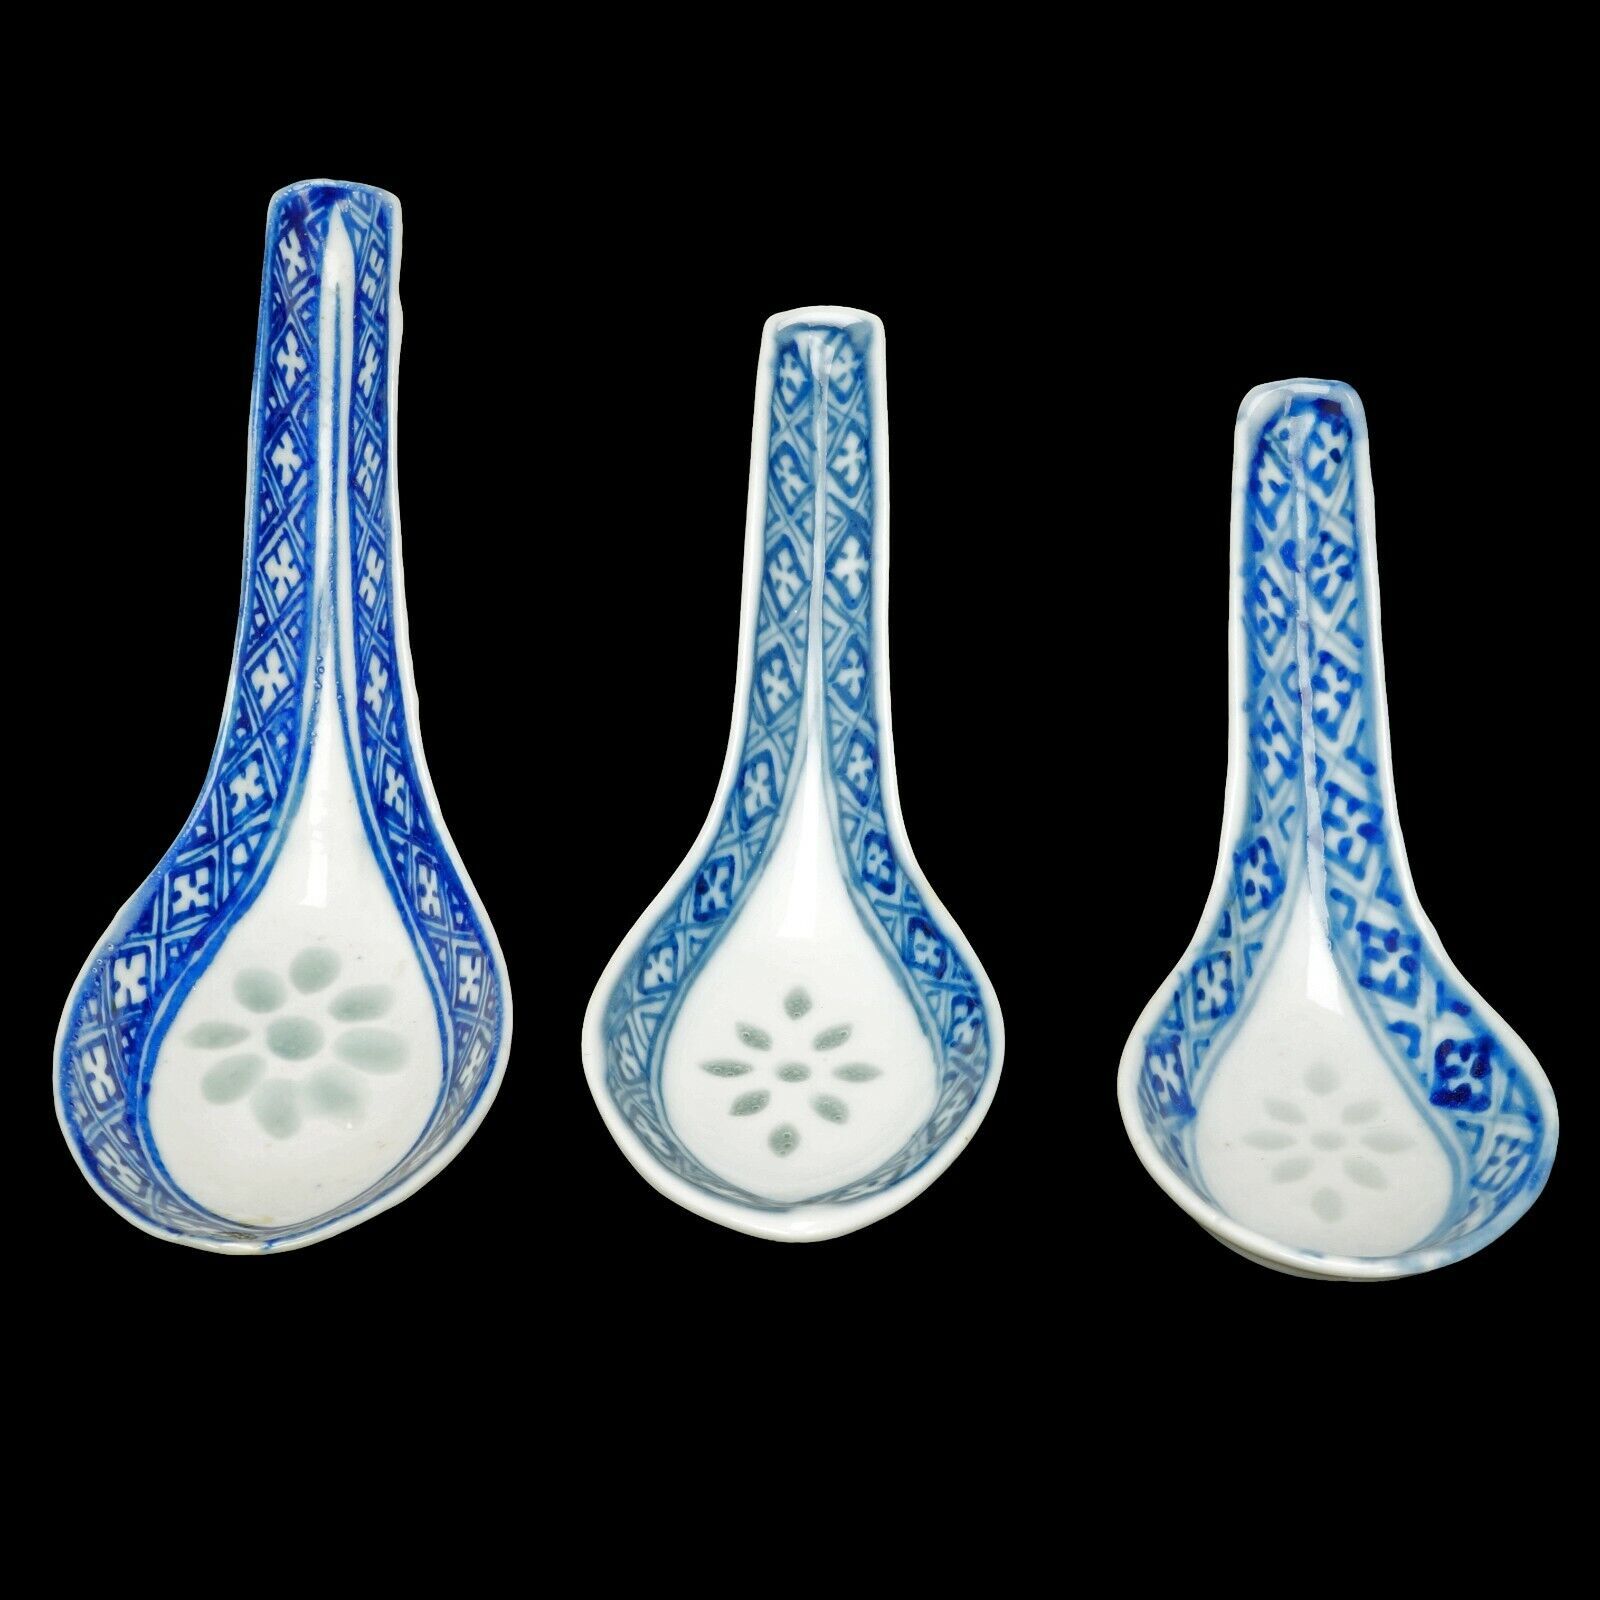 Primary image for Set of Three Hand Painted Chinese Porcelain Spoons early 20th Century